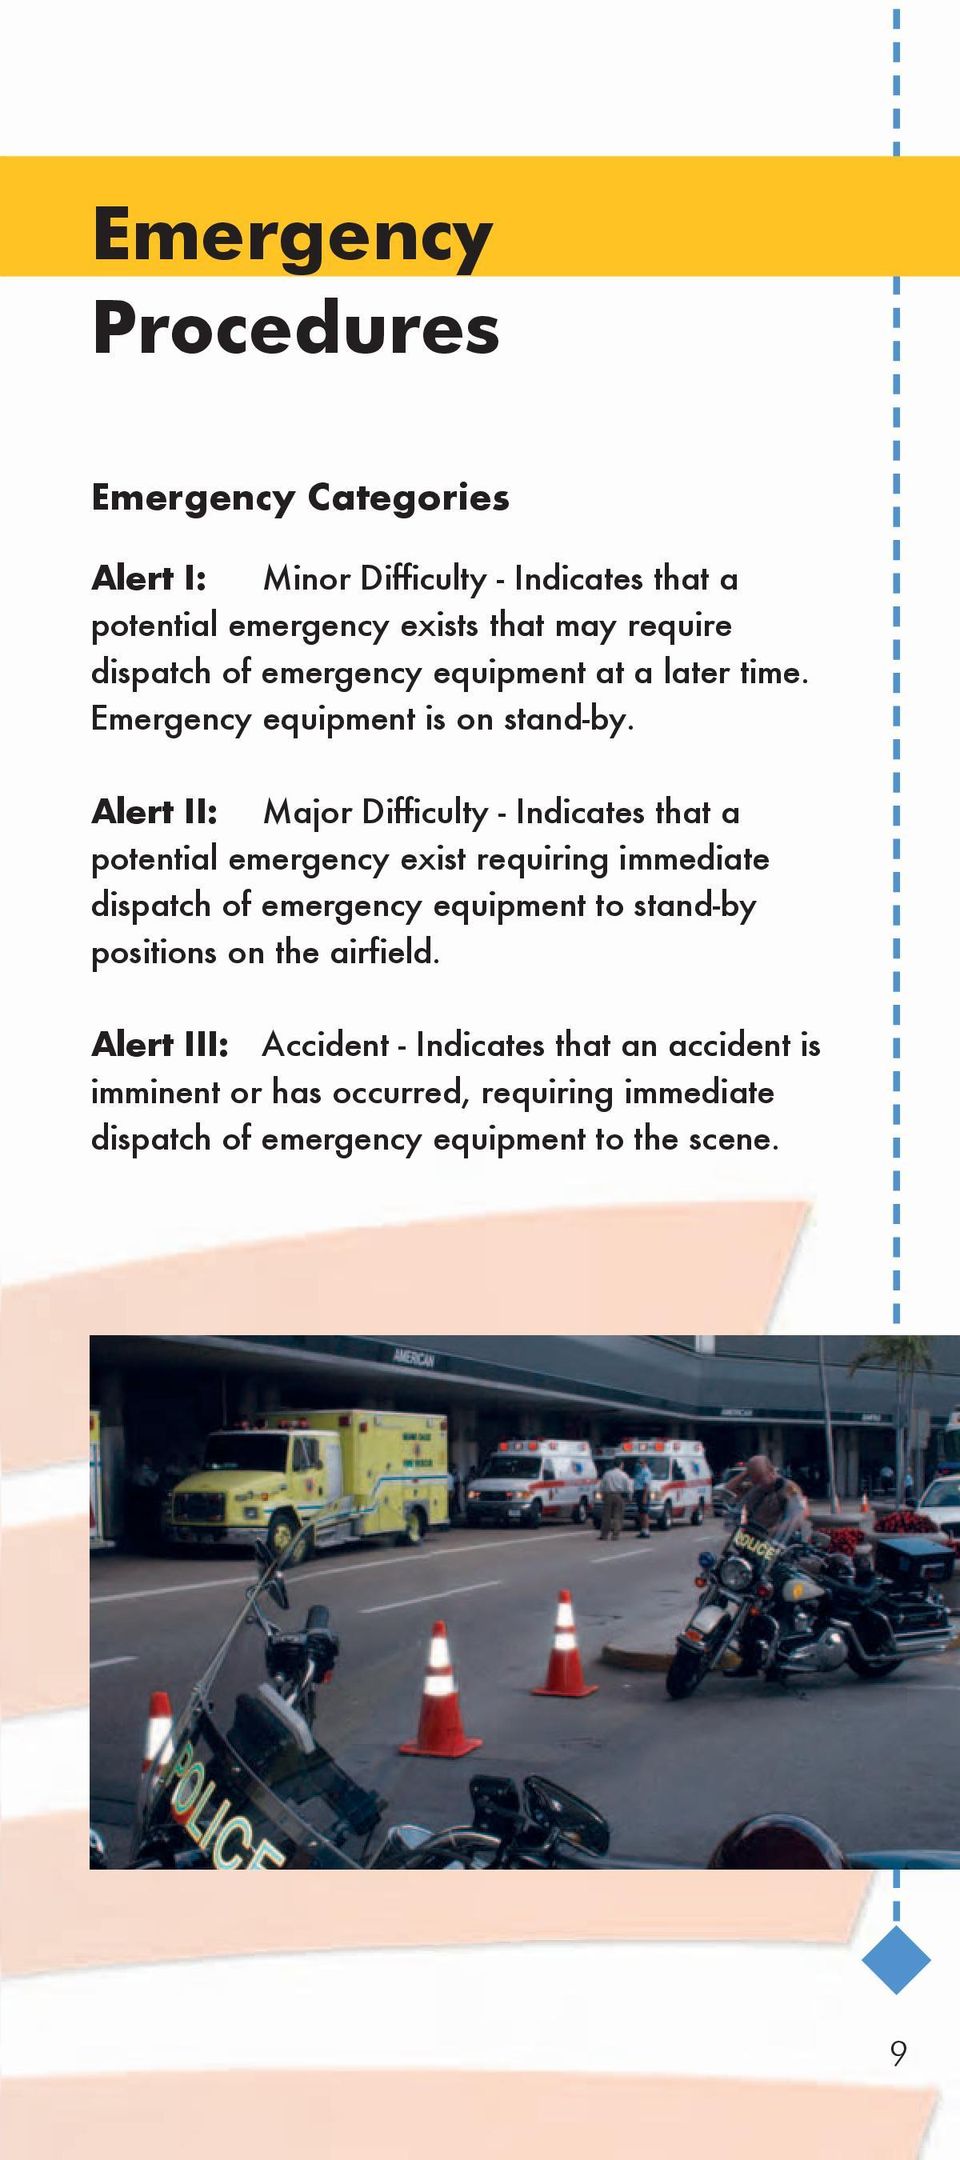 Alert II: Major Difficulty - Indicates that a potential emergency exist requiring immediate dispatch of emergency equipment to